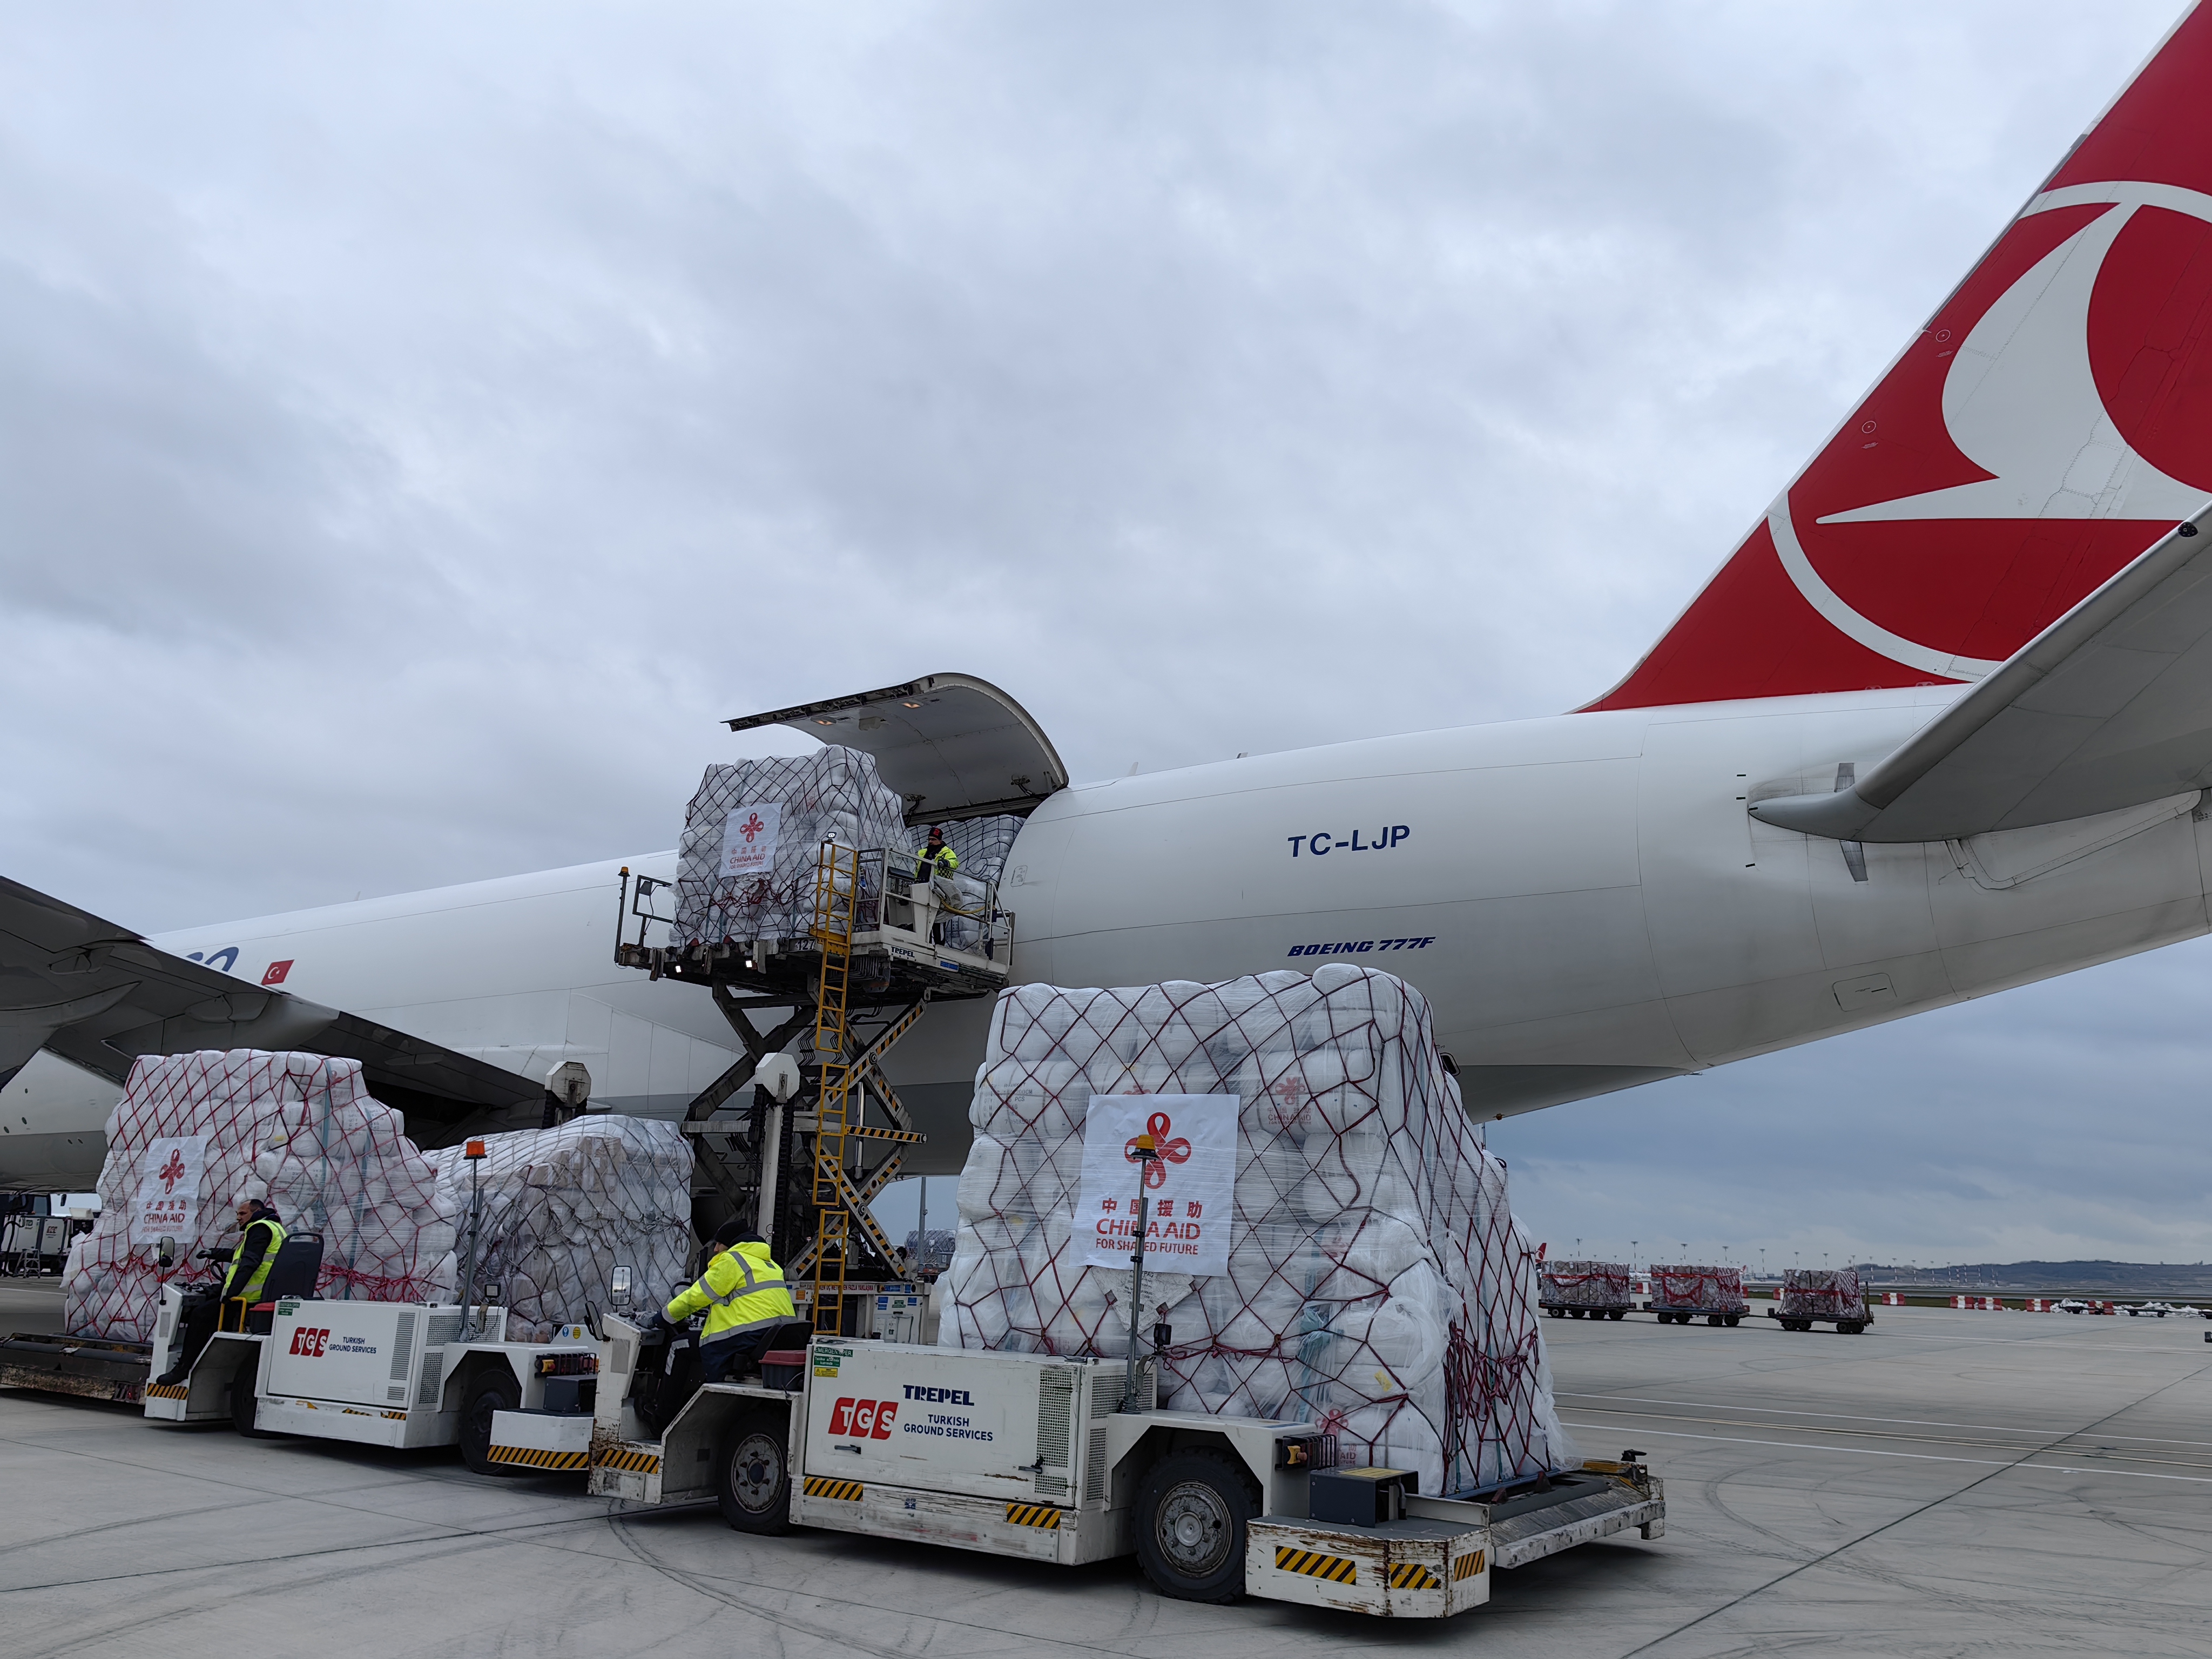 The first batch of disaster relief supplies from the Chinese government to Türkiye arrives at Istanbul International Airport, Türkiye, February 11, 2023. /CMG